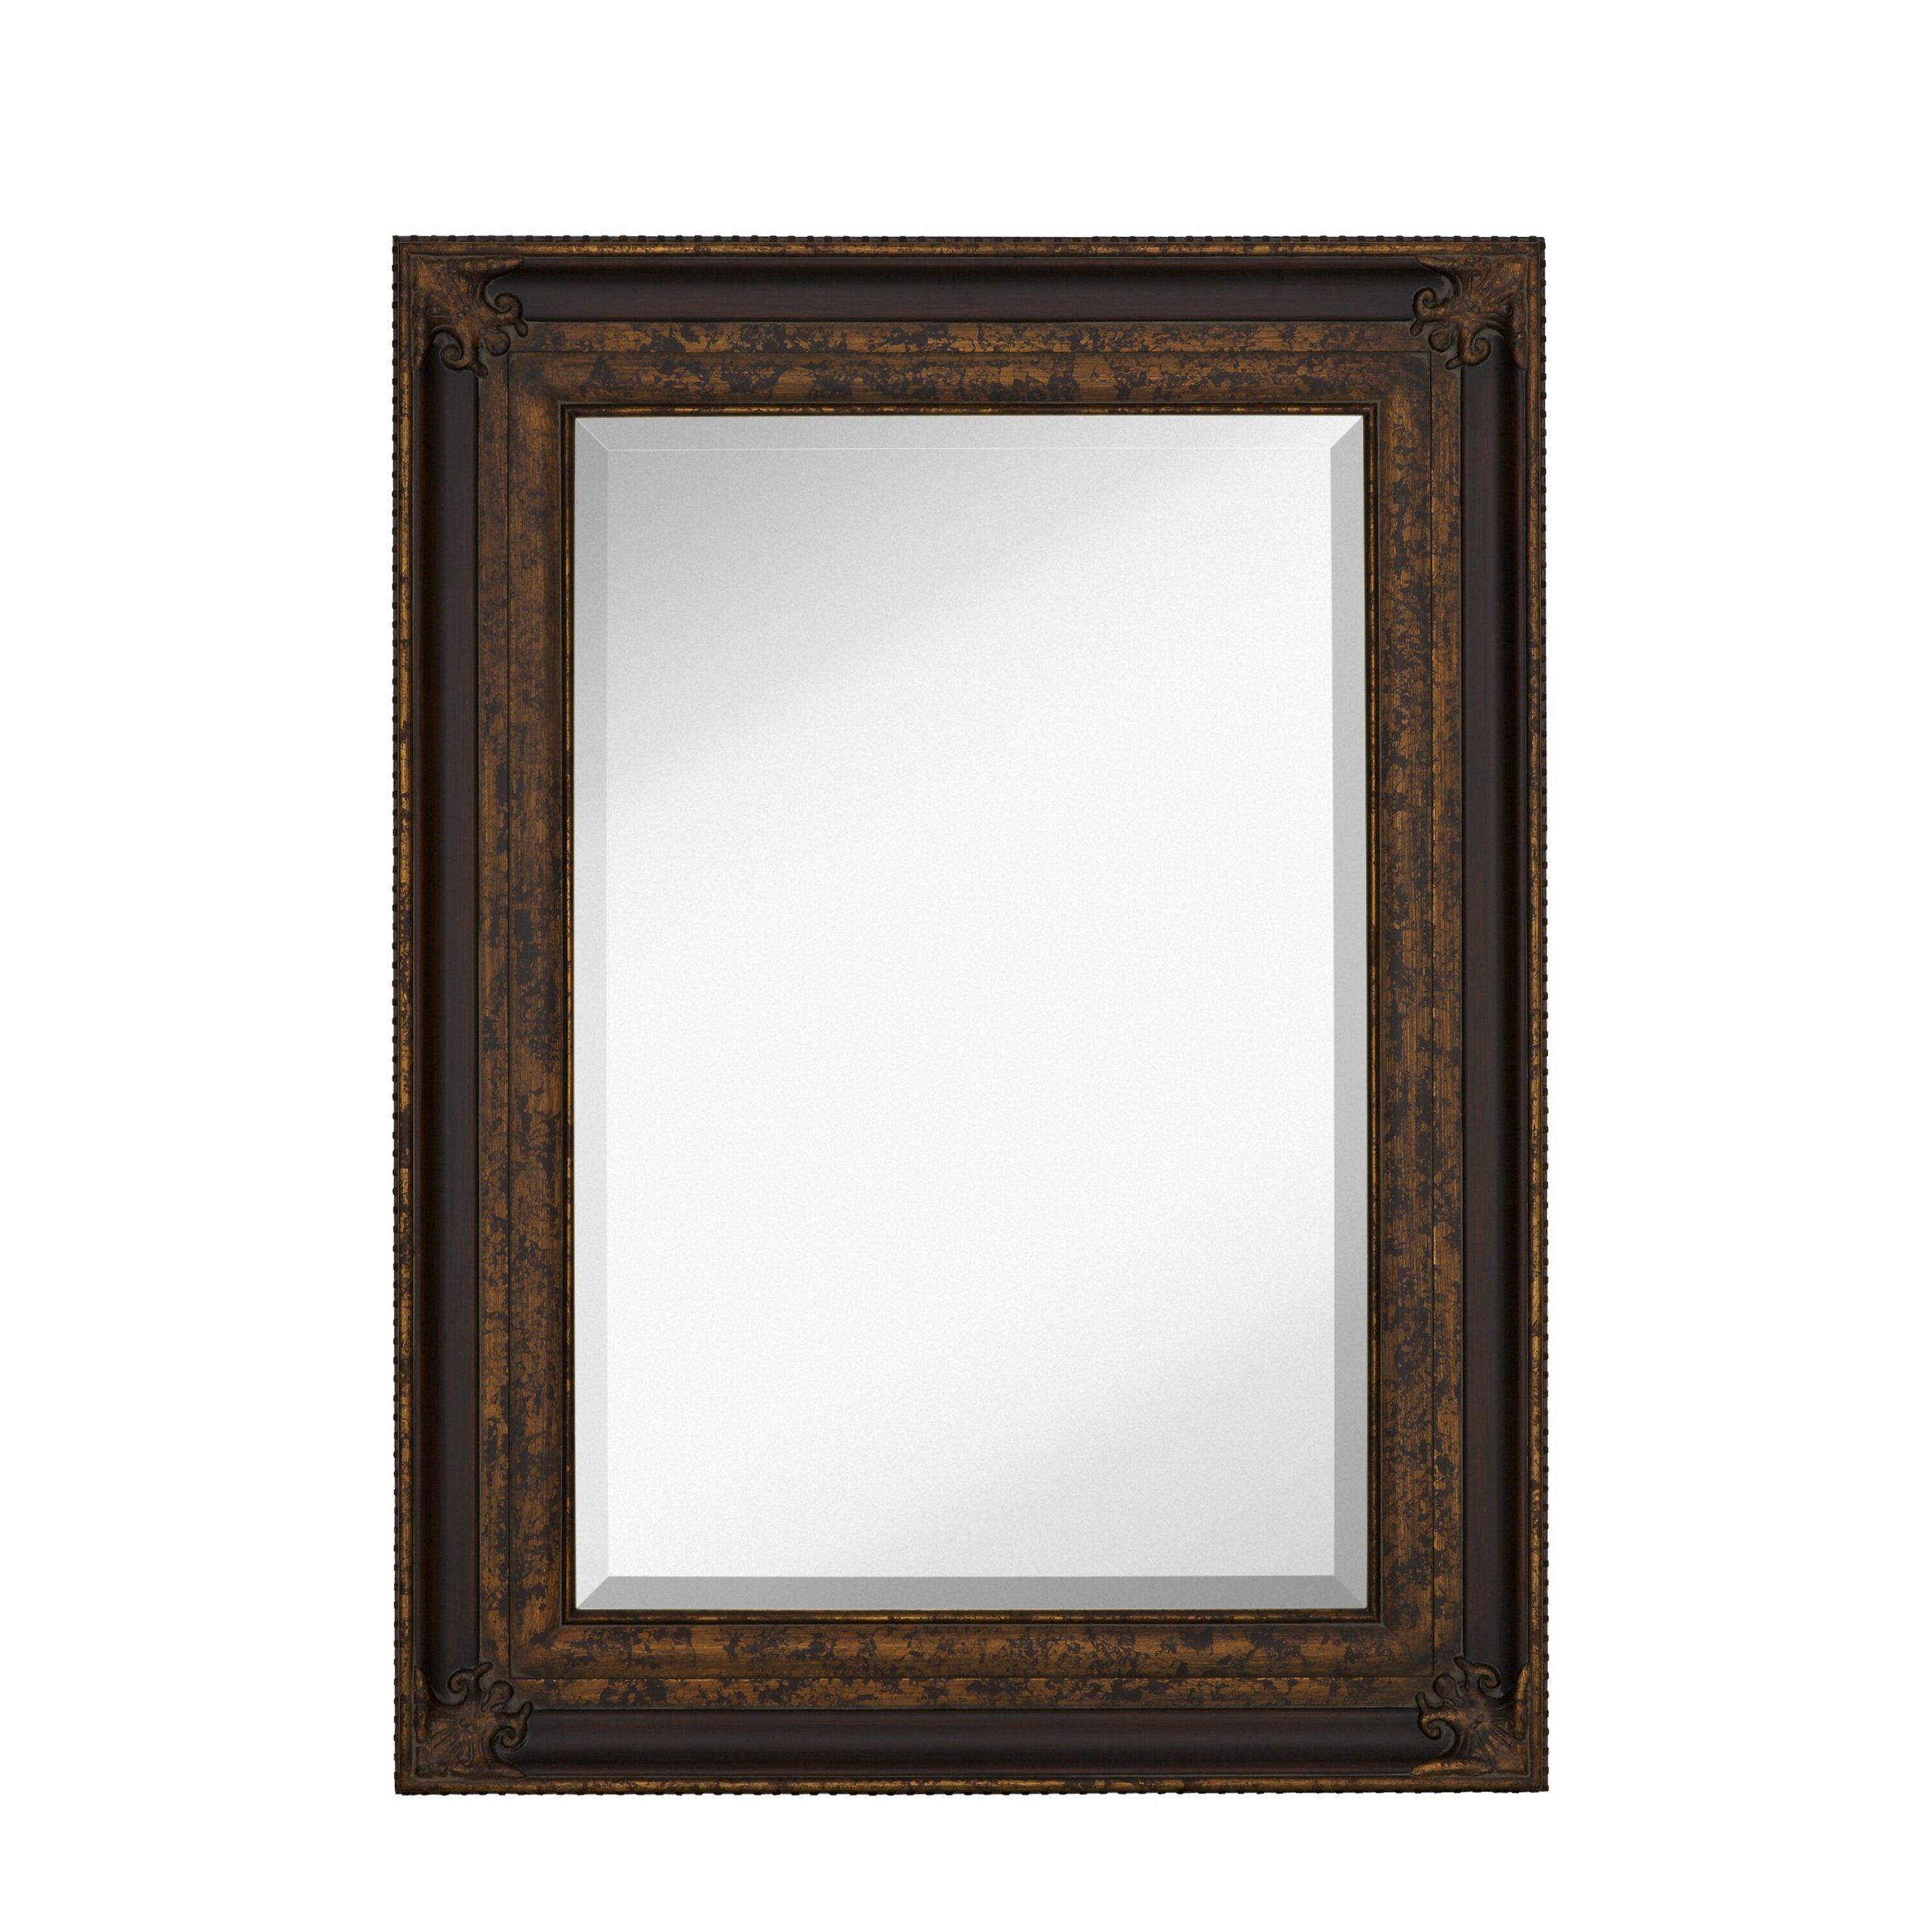 Majestic Mirror Rectangular Antique Gold Leaf With Dark Brown Panel With Brushed Gold Rectangular Framed Wall Mirrors (View 5 of 15)